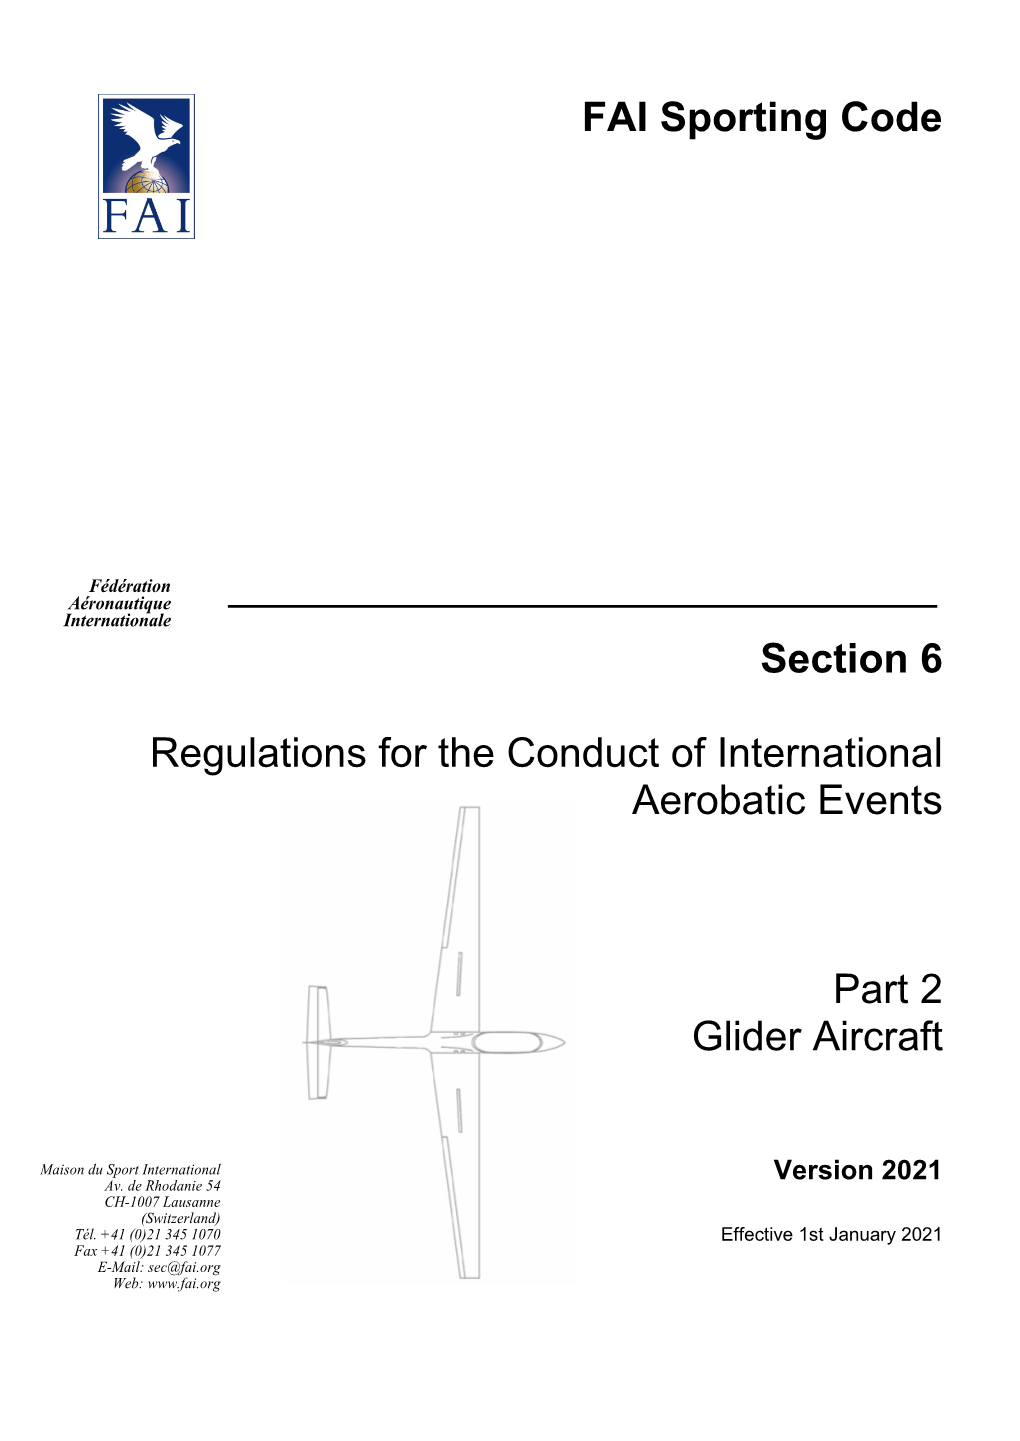 Section 6 Part 2 - Glider Aircraft Version 2021